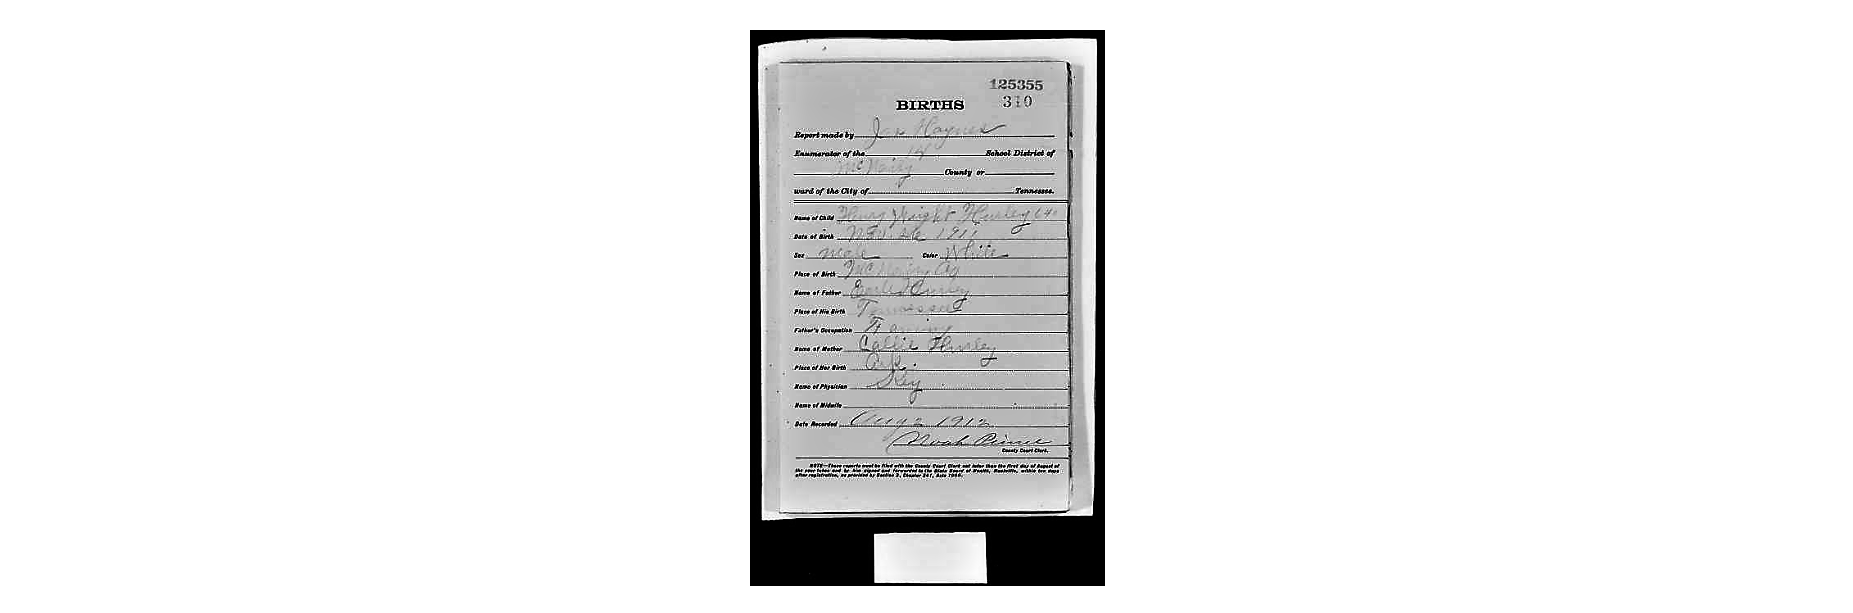 Birth Record Tennessee Mc Nairy - Henry Wright Hurley 2